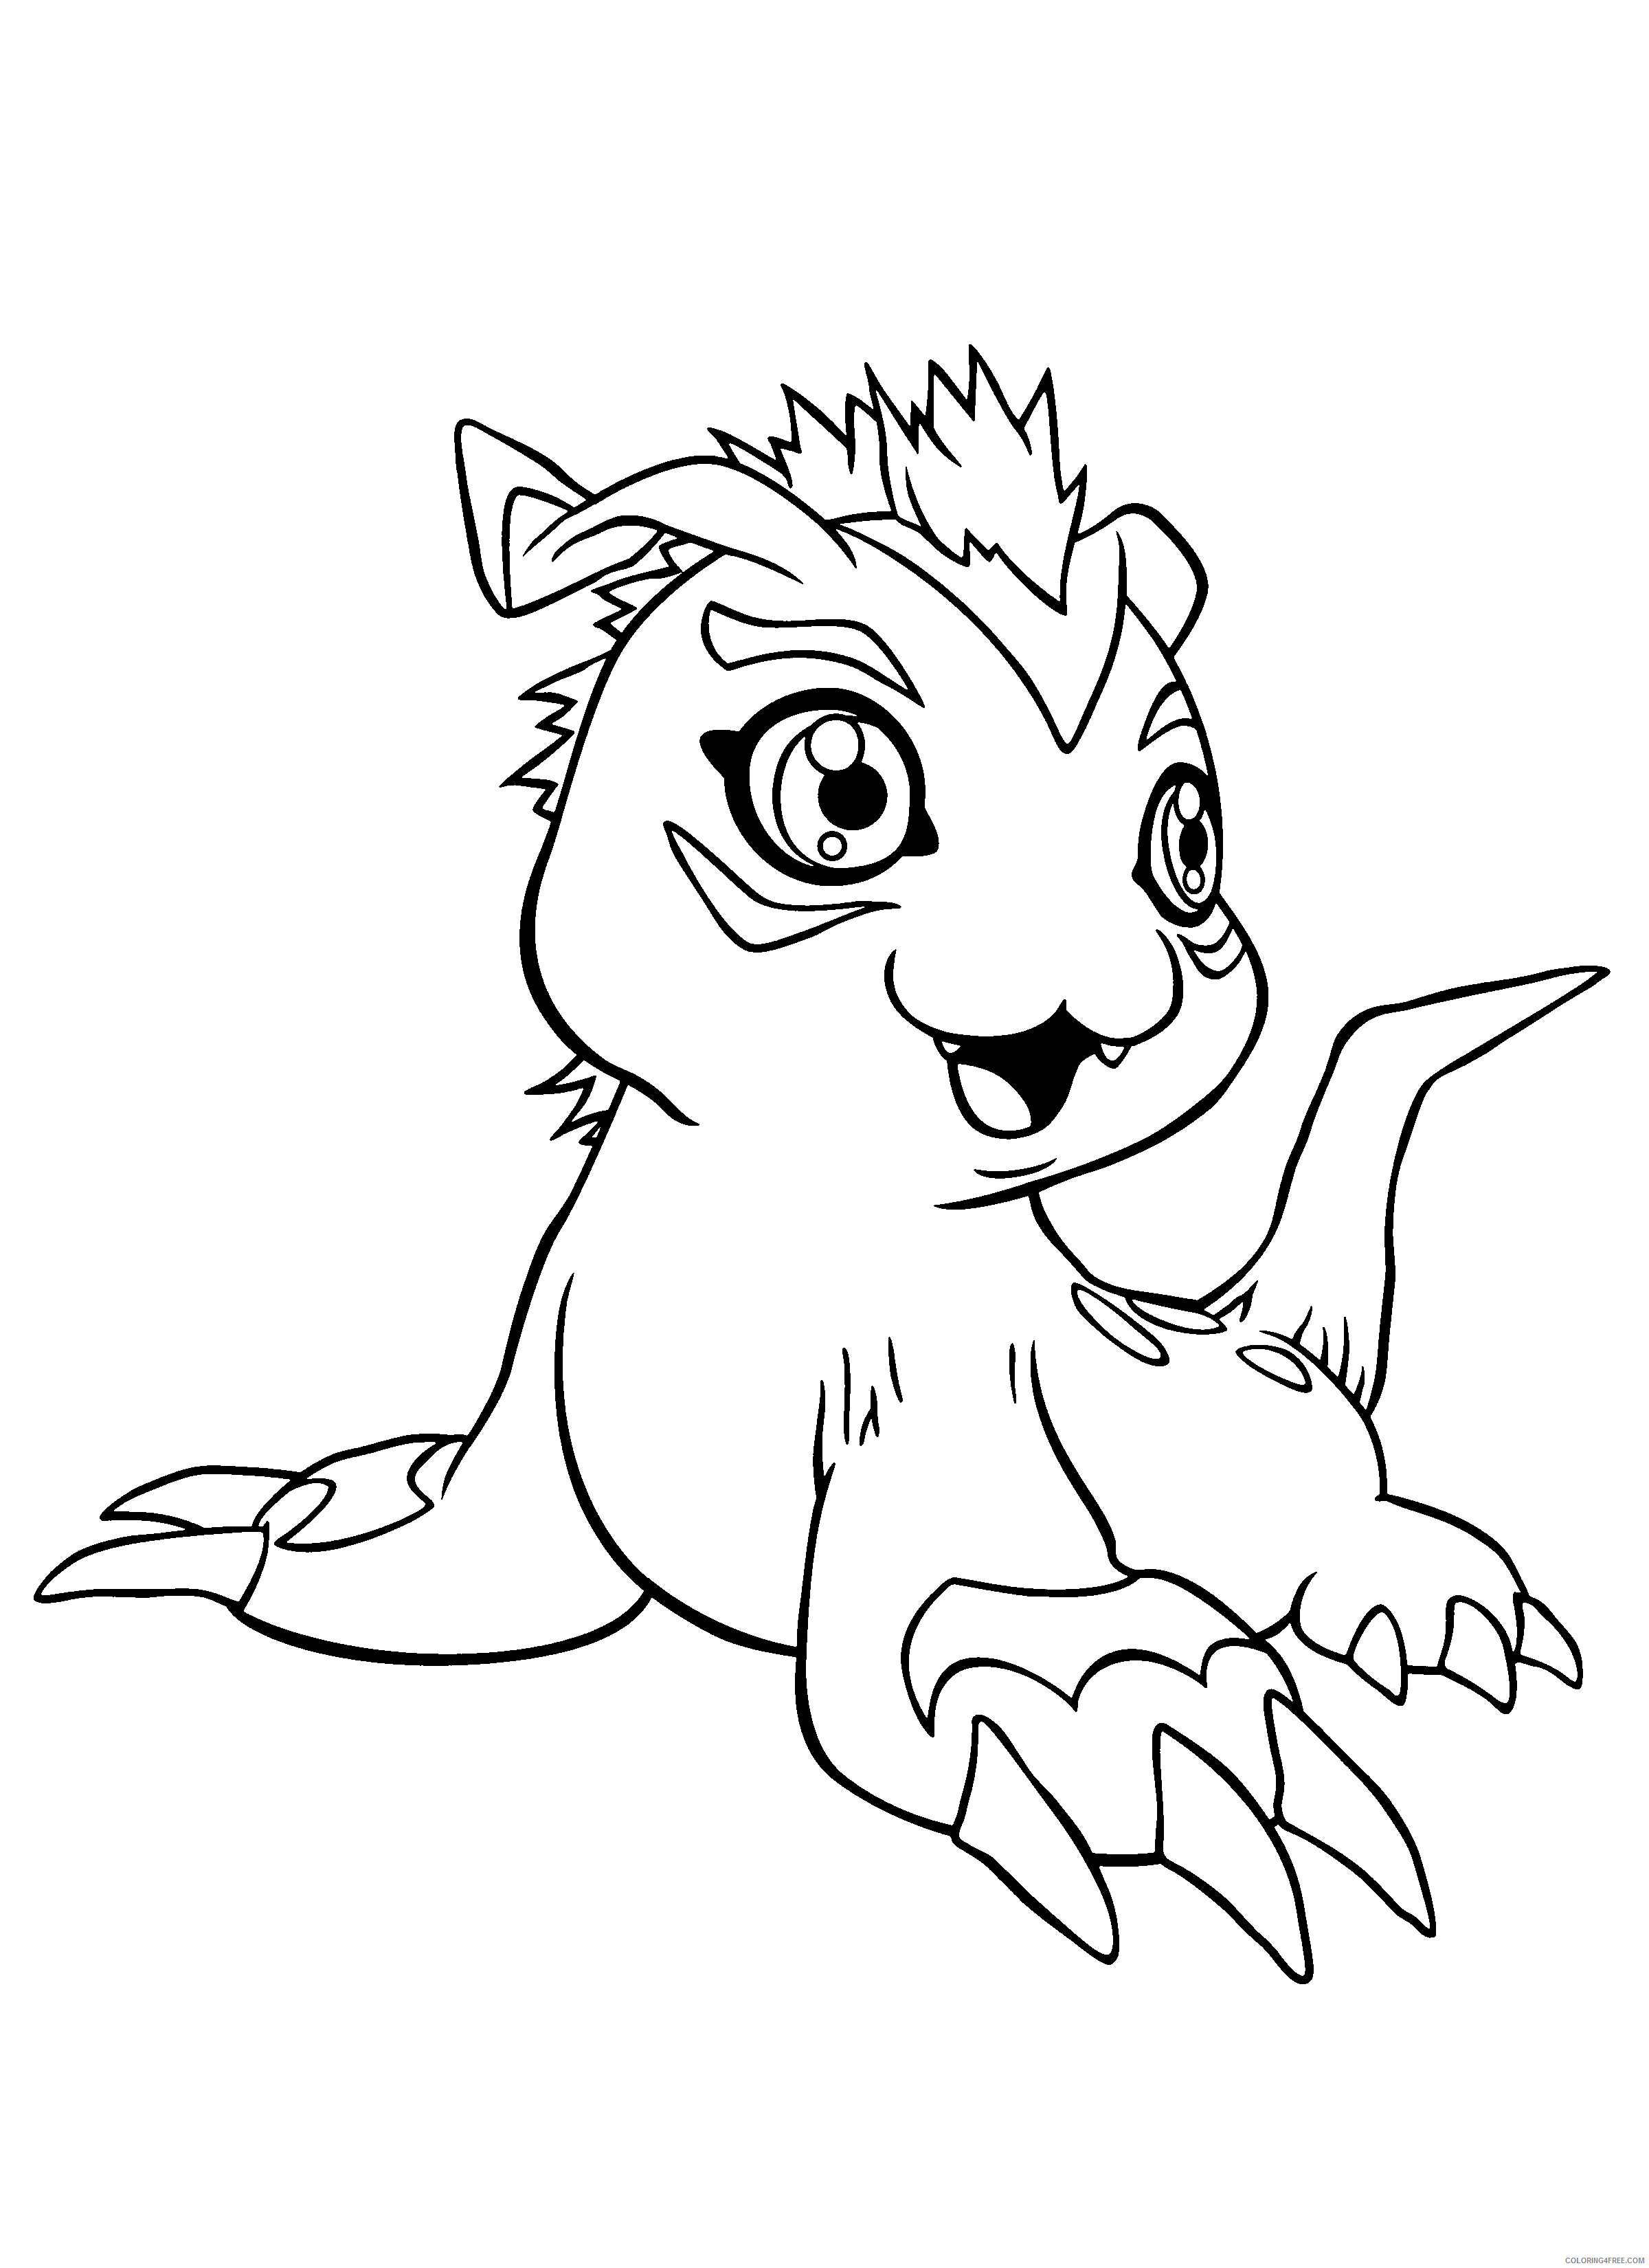 Digimon Printable Coloring Pages Anime digimon 179 2021 0268 Coloring4free